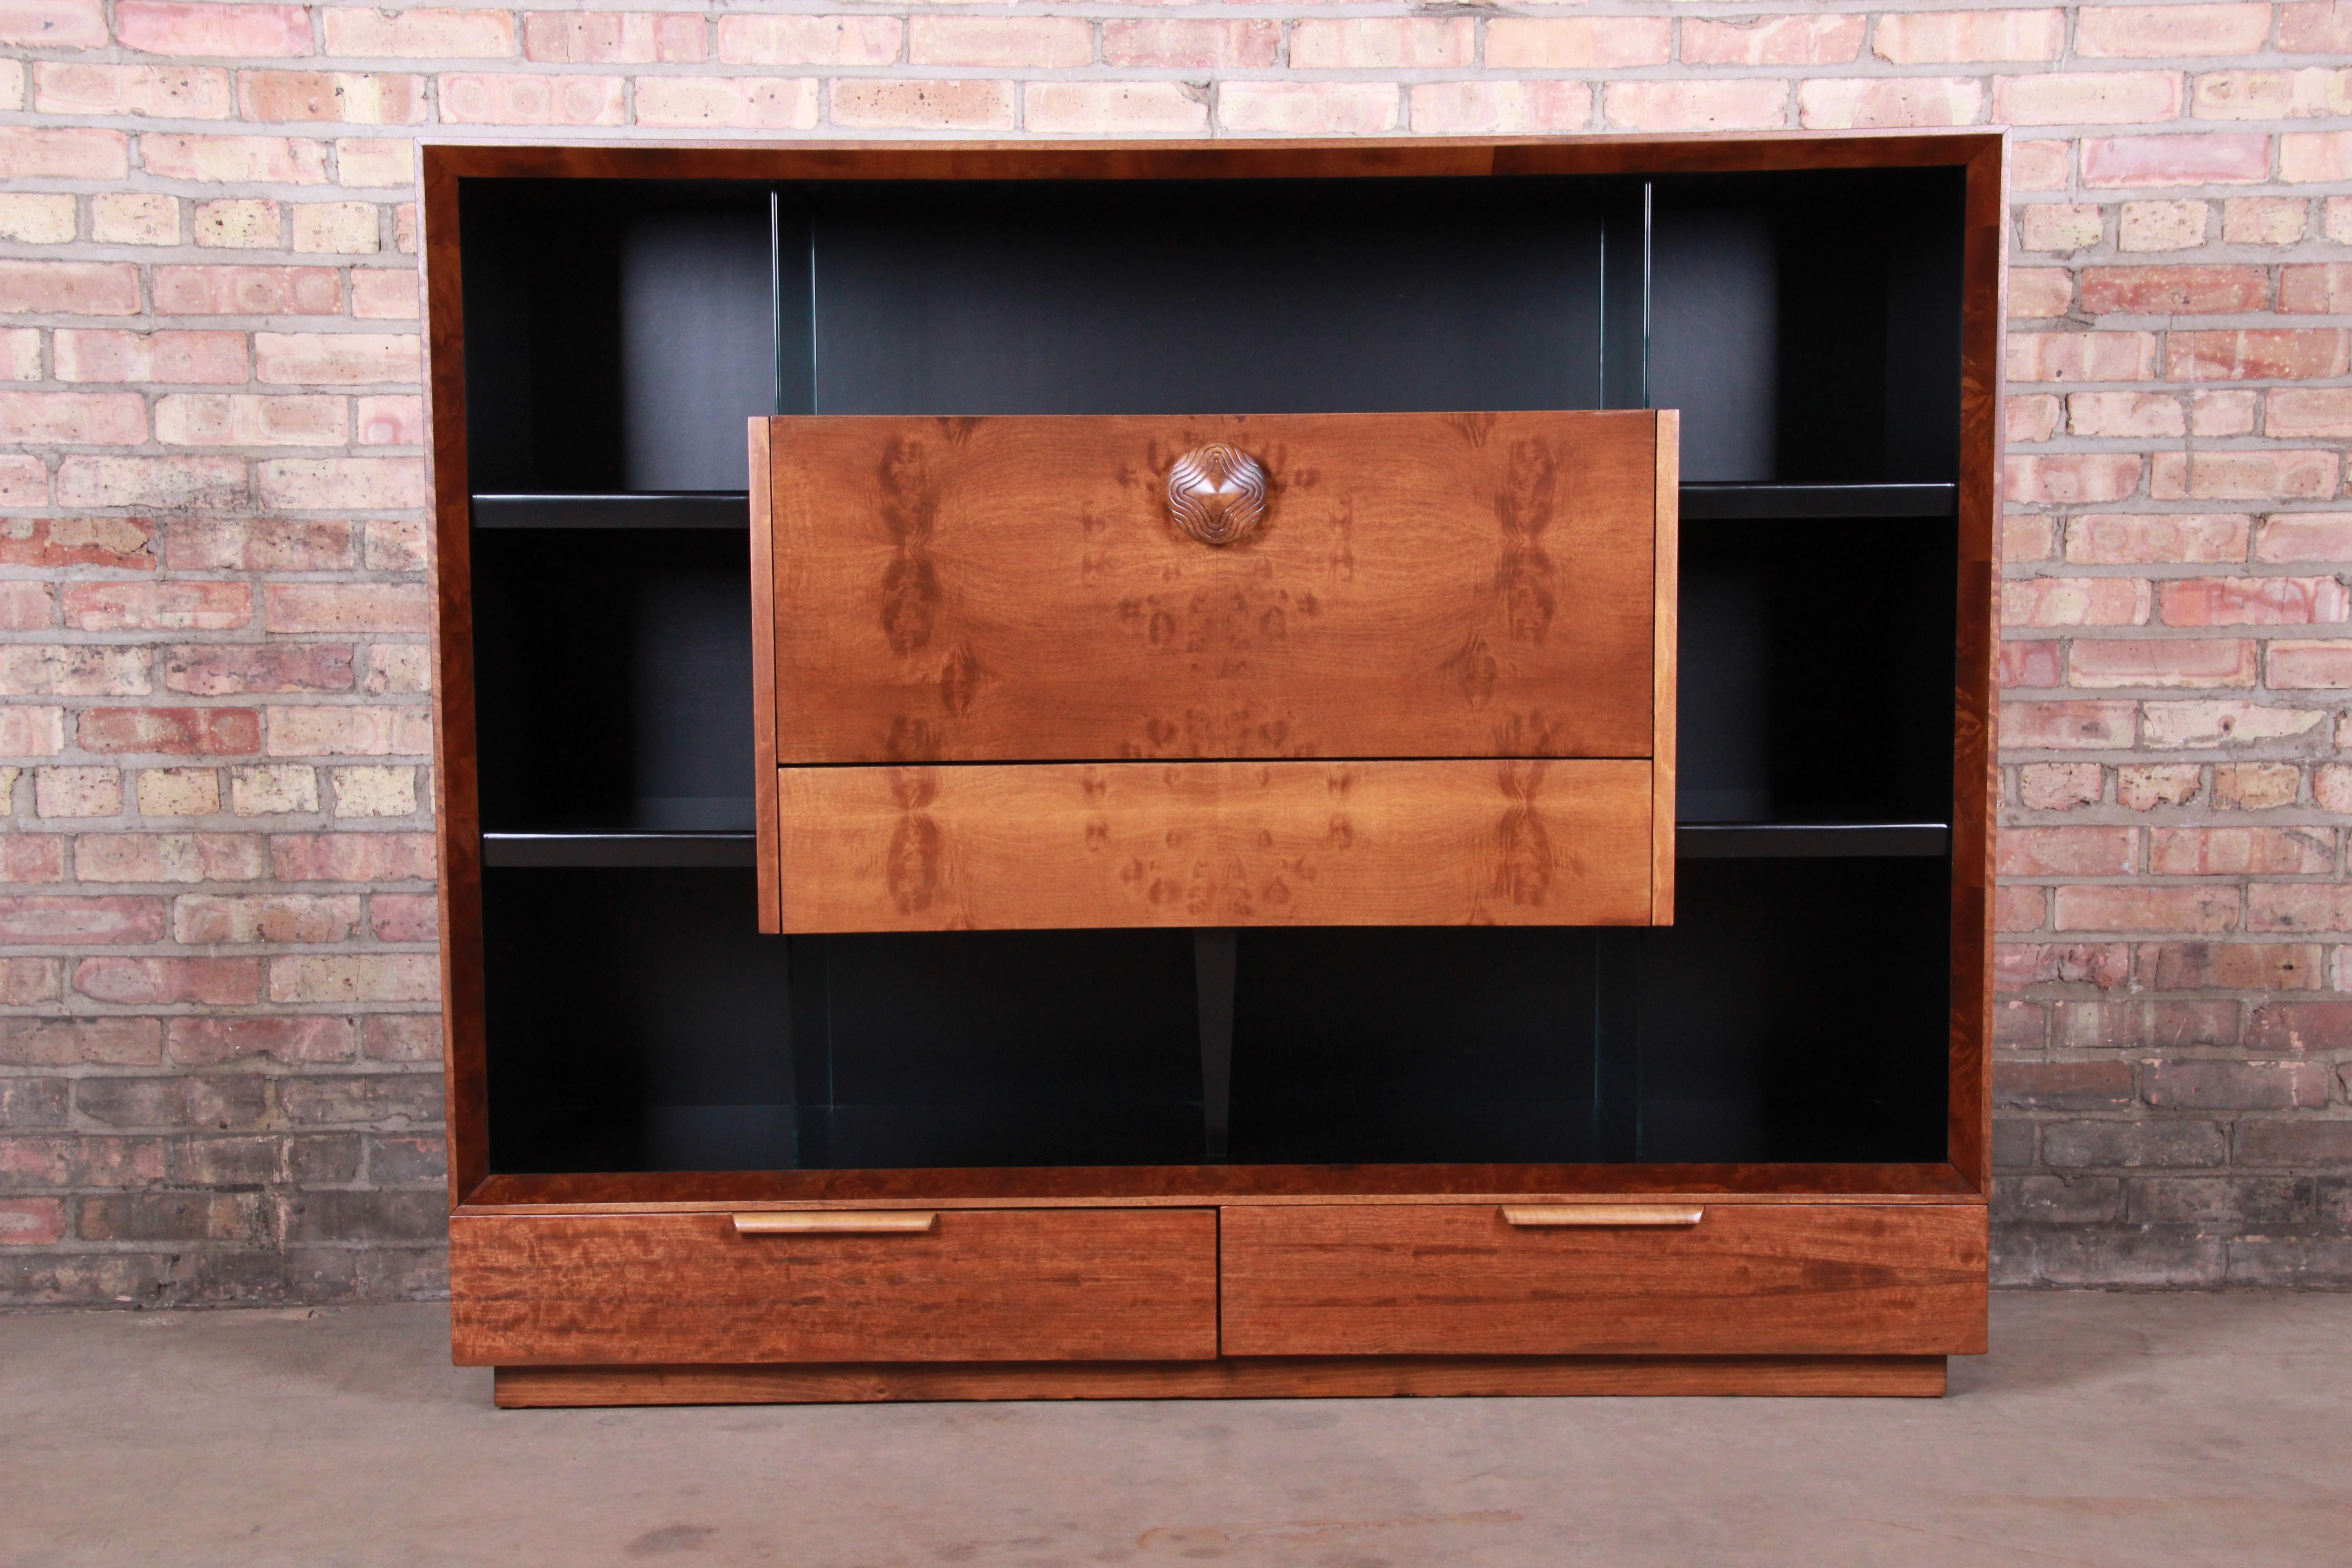 An extremely rare and exceptional Mid-Century Modern bookcase cabinet with drop-front secretary desk

Designed by Gilbert Rohde for Herman Miller 